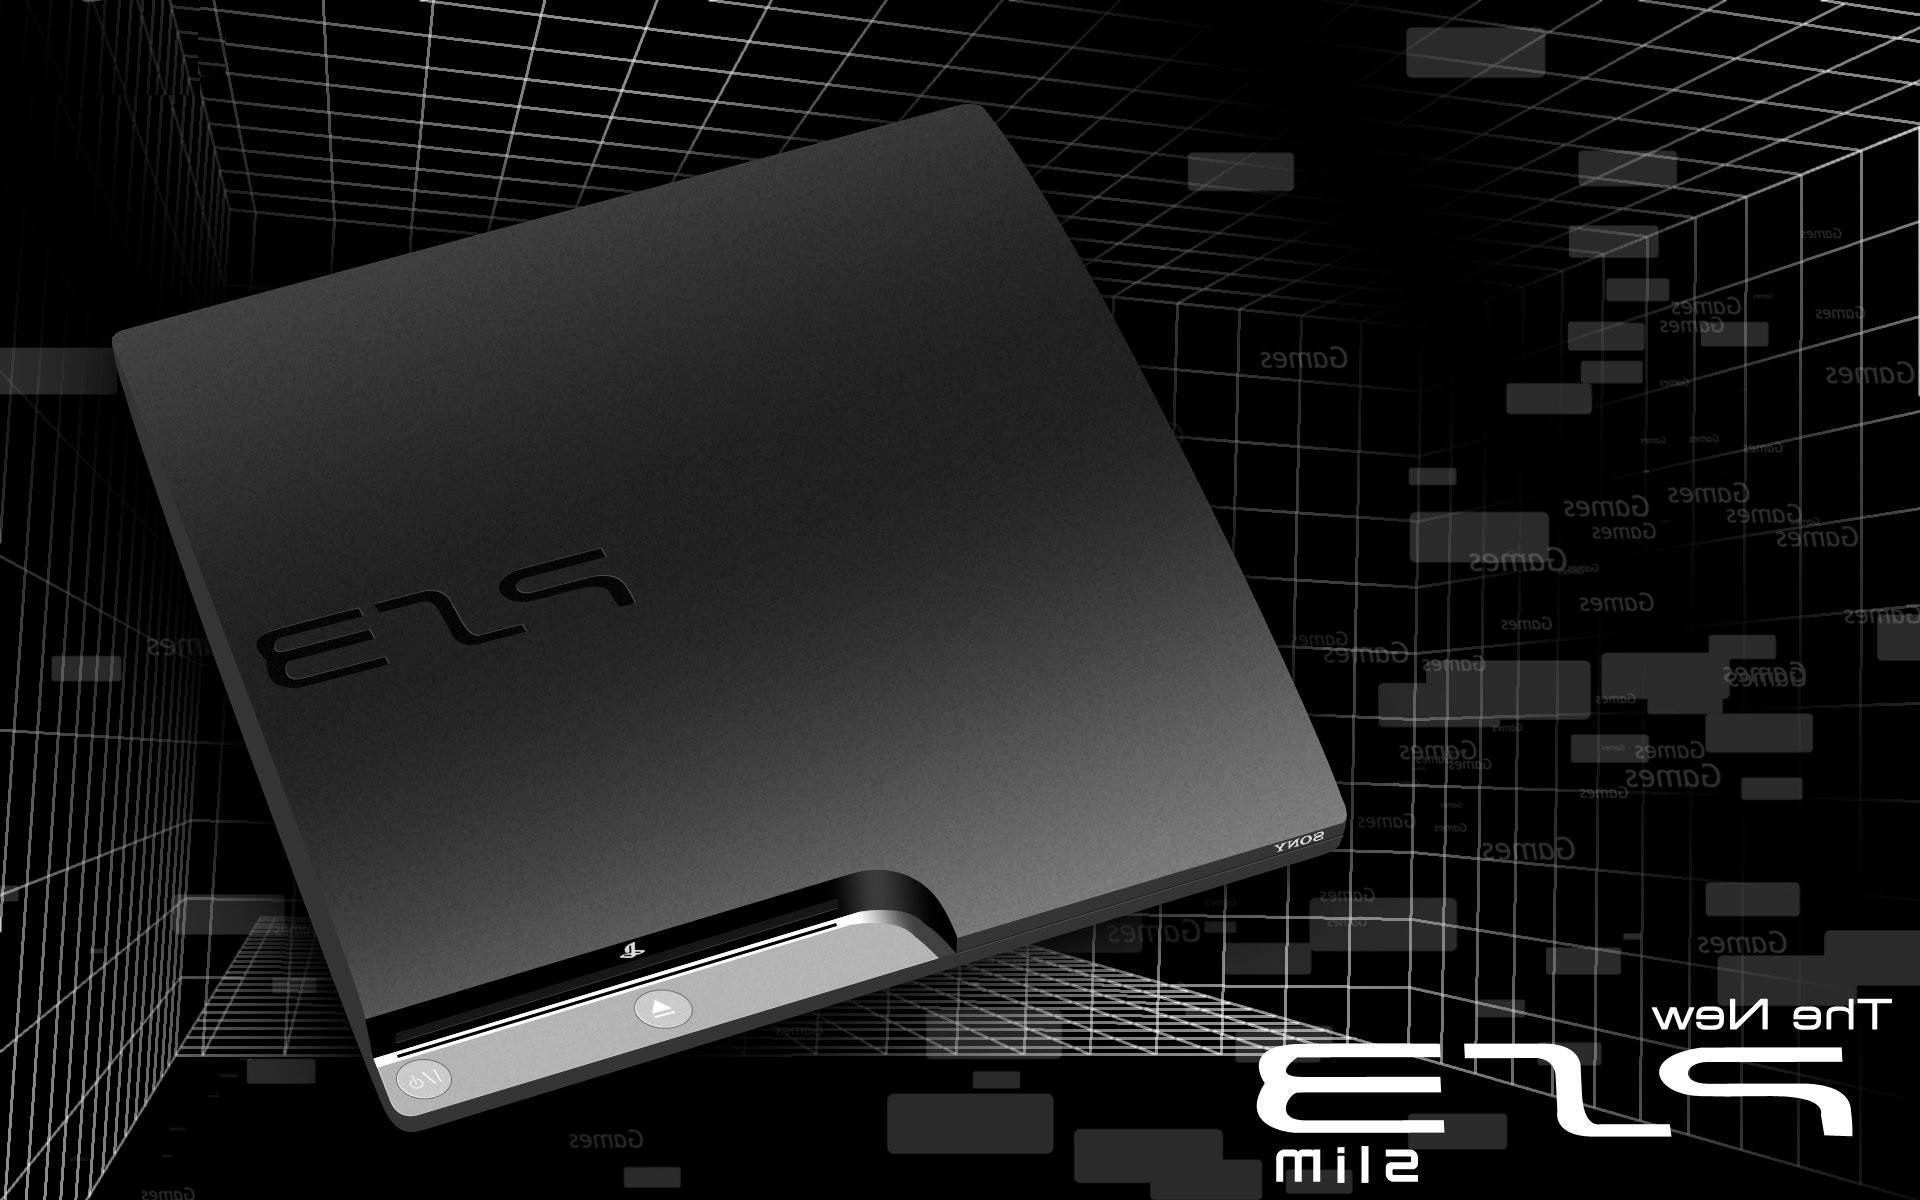 Ps3 Wallpapers Cool 1920x1200